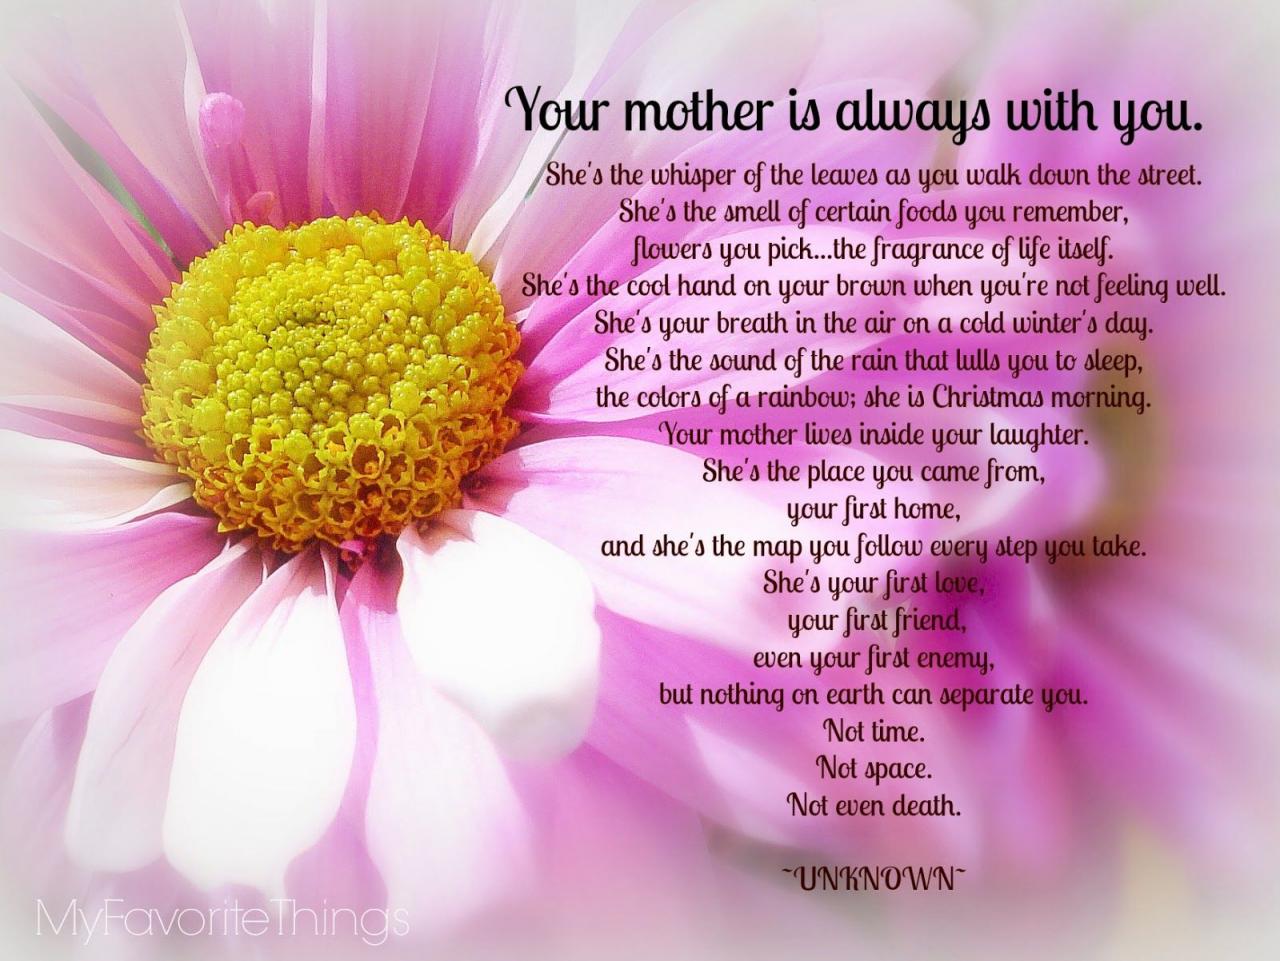 Happy heavenly mother's day mom